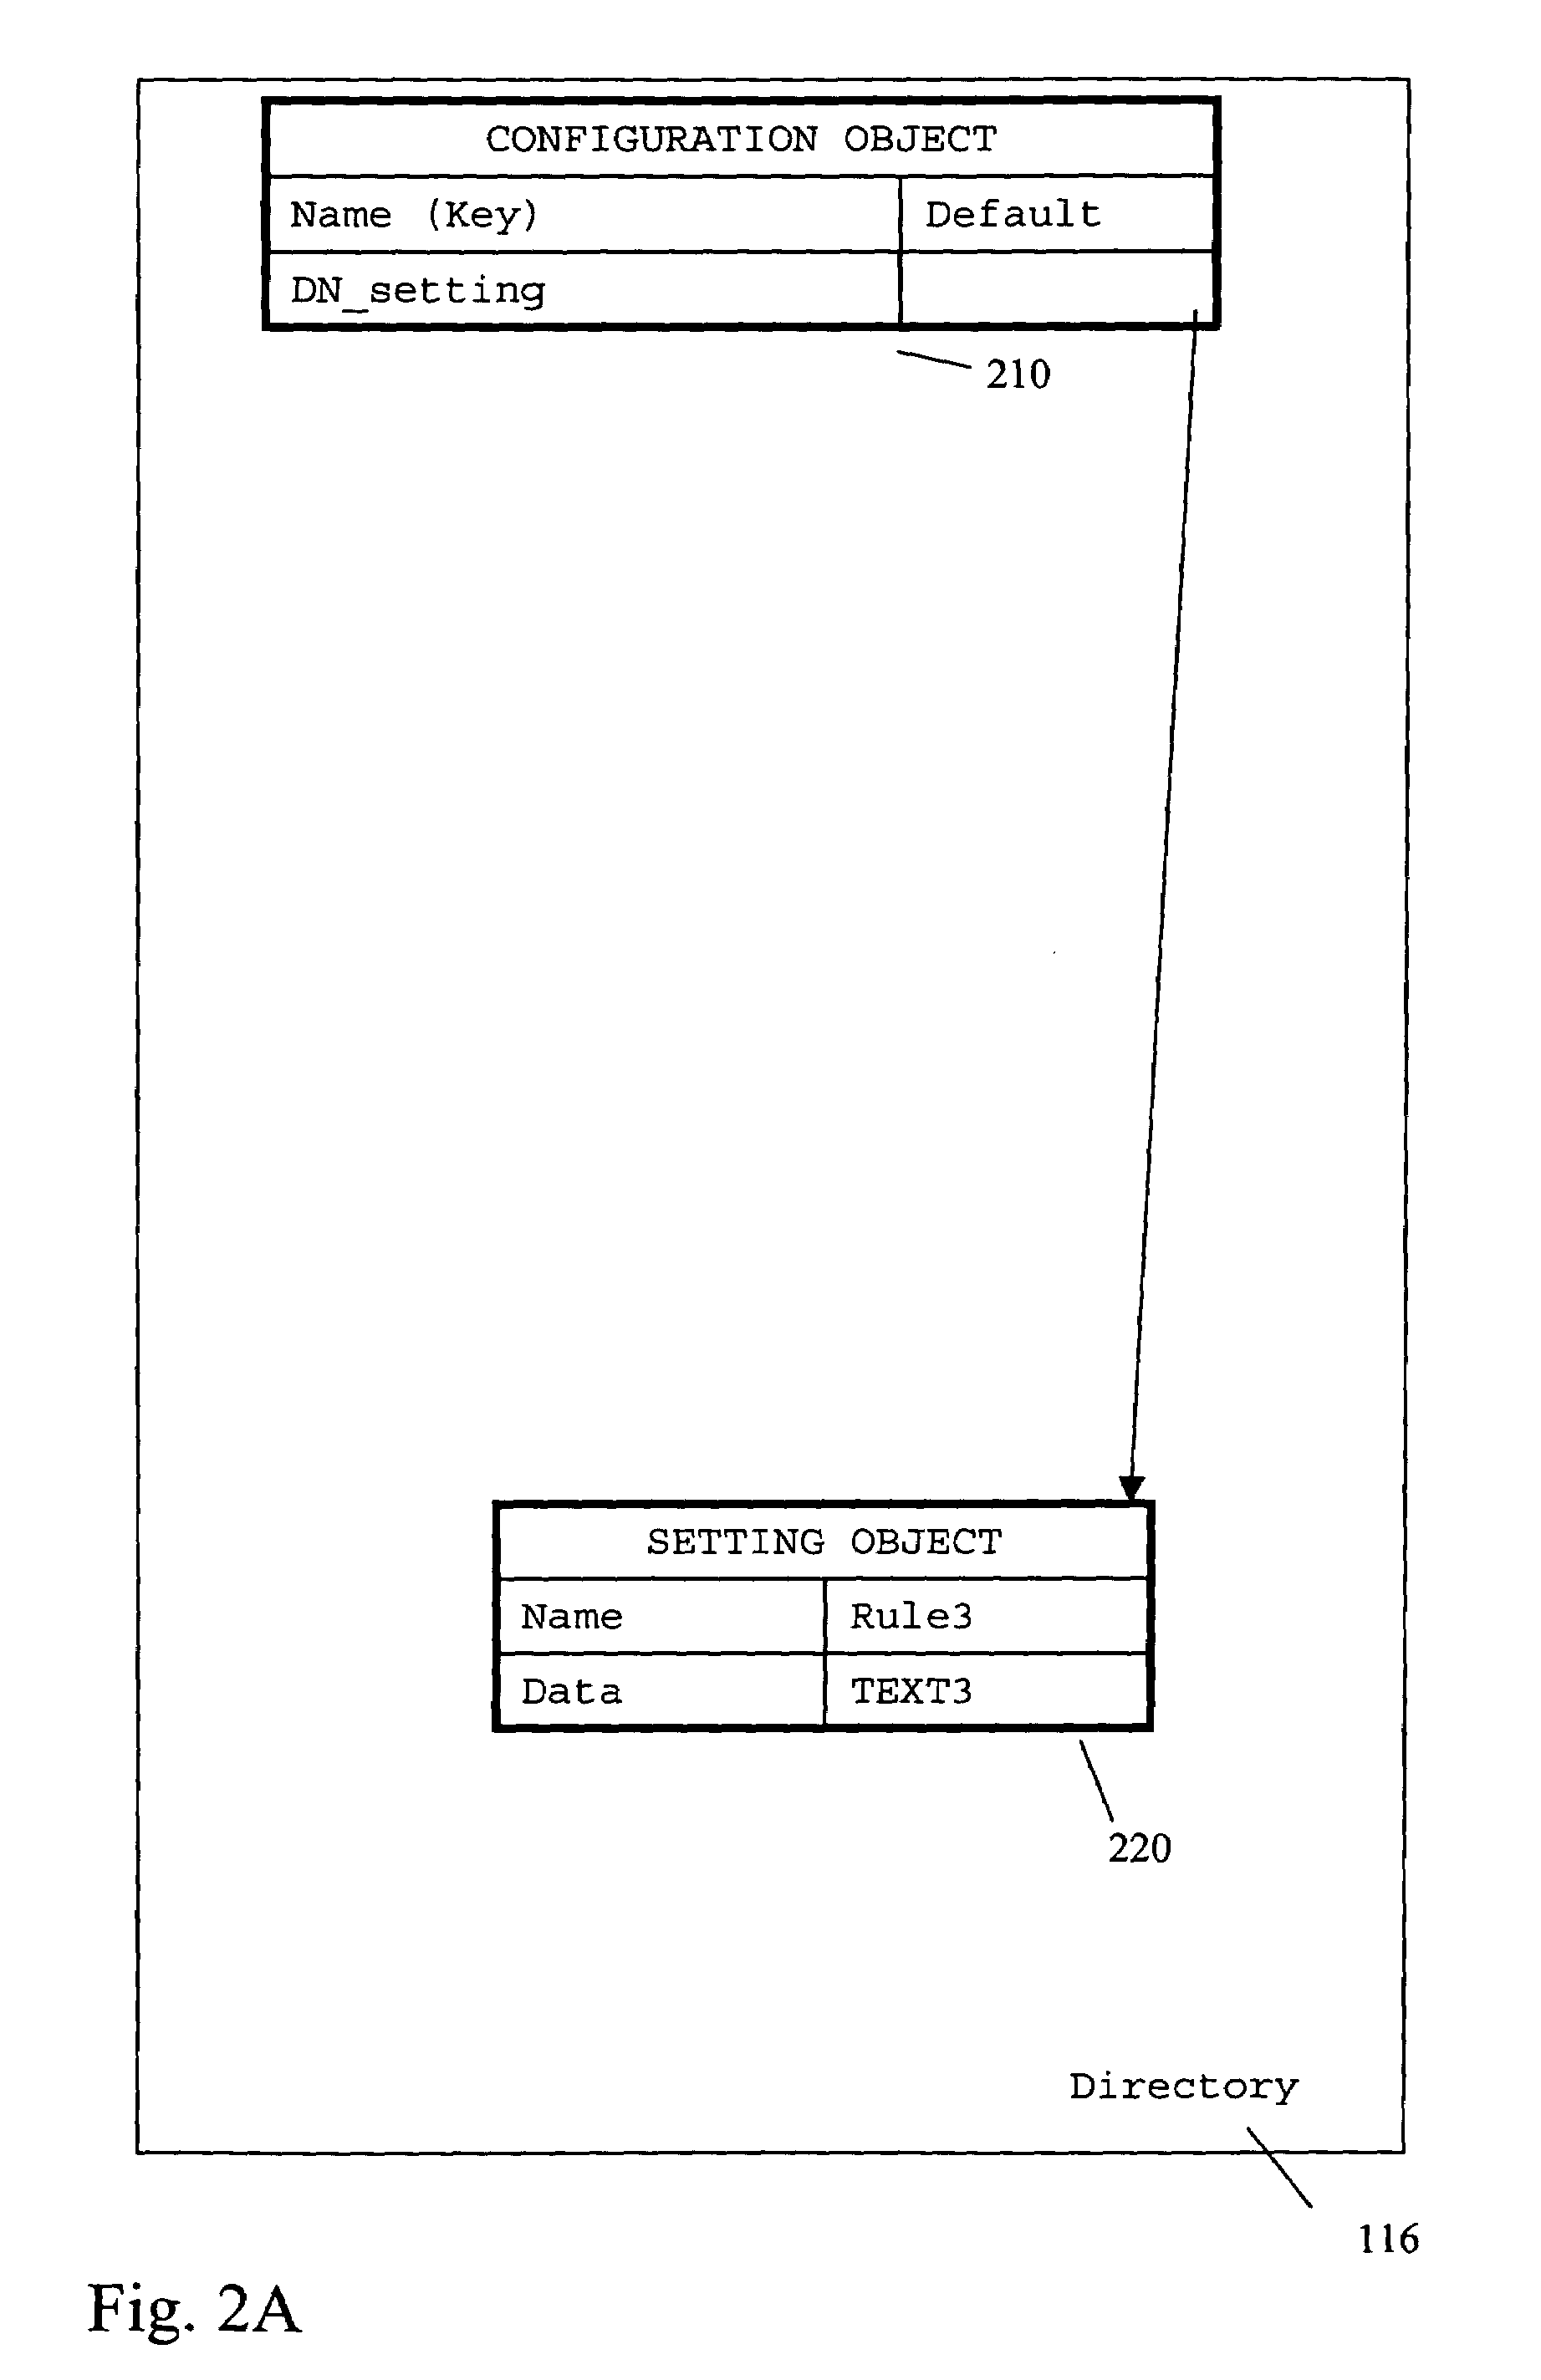 Configuration system and methods including configuration inheritance and revisioning